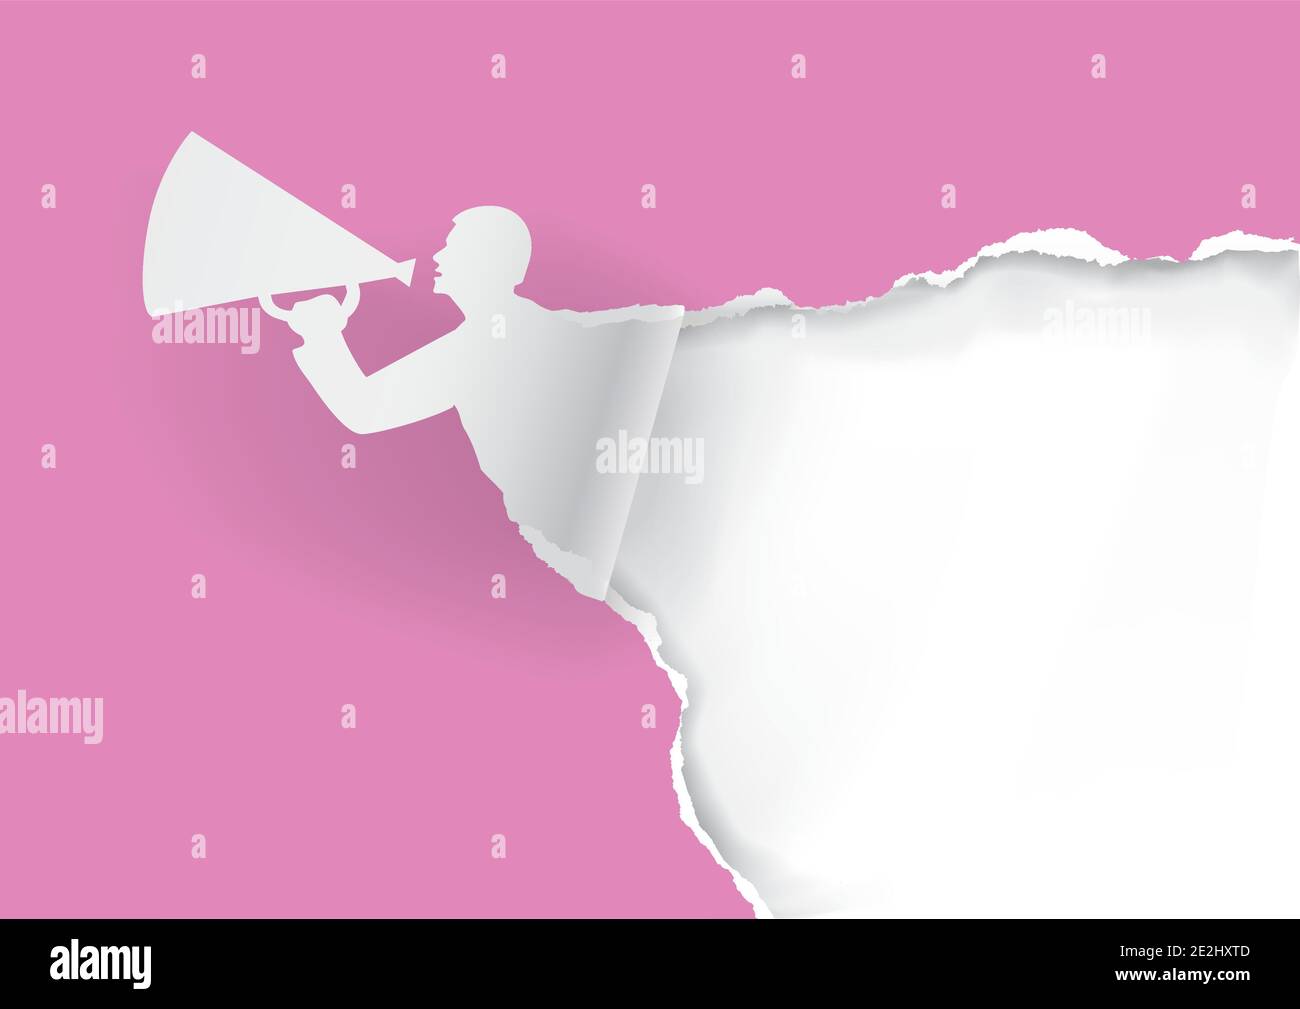 Declaration of love with a megaphone. Man with megaphone ripping pink paper background with place for your text or image. Template for Valentine day. Stock Vector